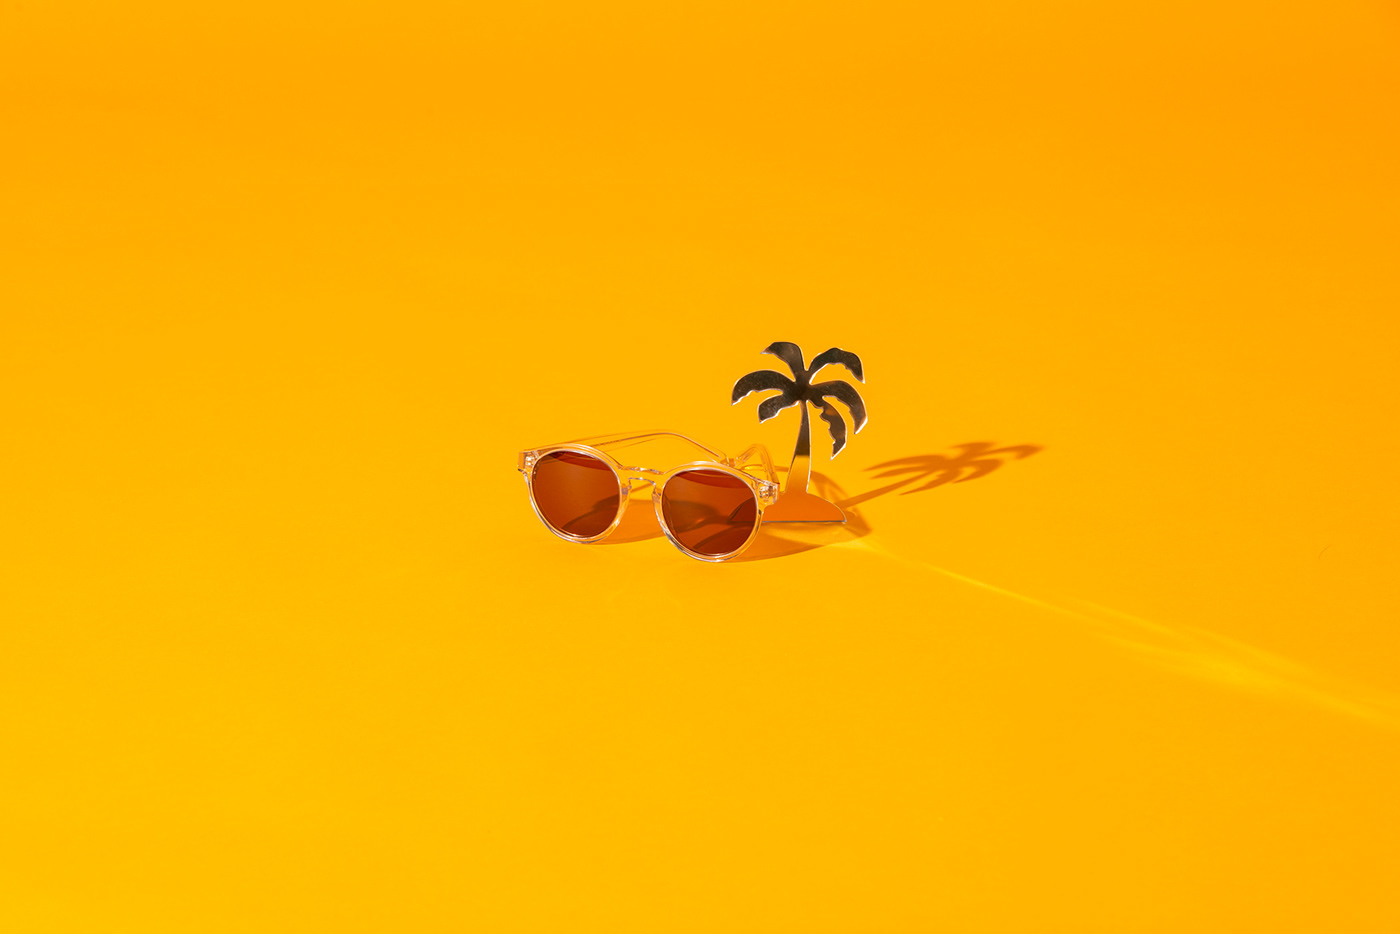 accessories Sunglasses sand beach sunset commercial handcrafted gif moving images colors